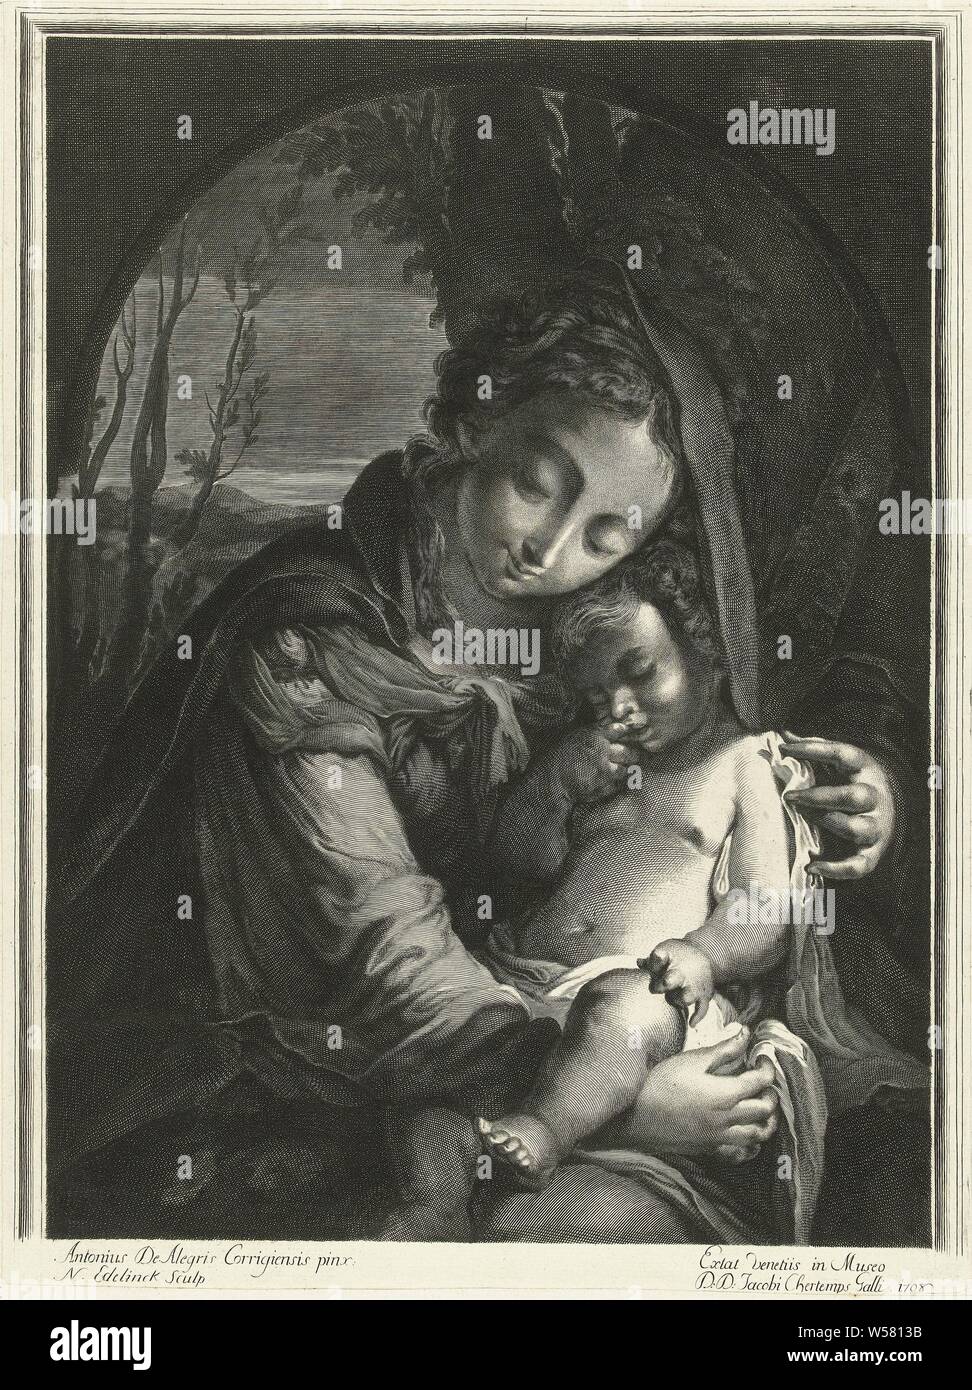 Maria with child, Maria is seated, half-length depicted under a round arch. She holds the sleeping Christ child in her arms. In the background a mountain landscape with trees is visible., Madonna: Mary sitting or excited, the Christ-child in her lap (or in front or her bosom) (Mary sometimes represented half-length), Nicolas Etienne Edelinck (mentioned on object), 1705, paper, engraving, h 430 mm × w 324 mm Stock Photo